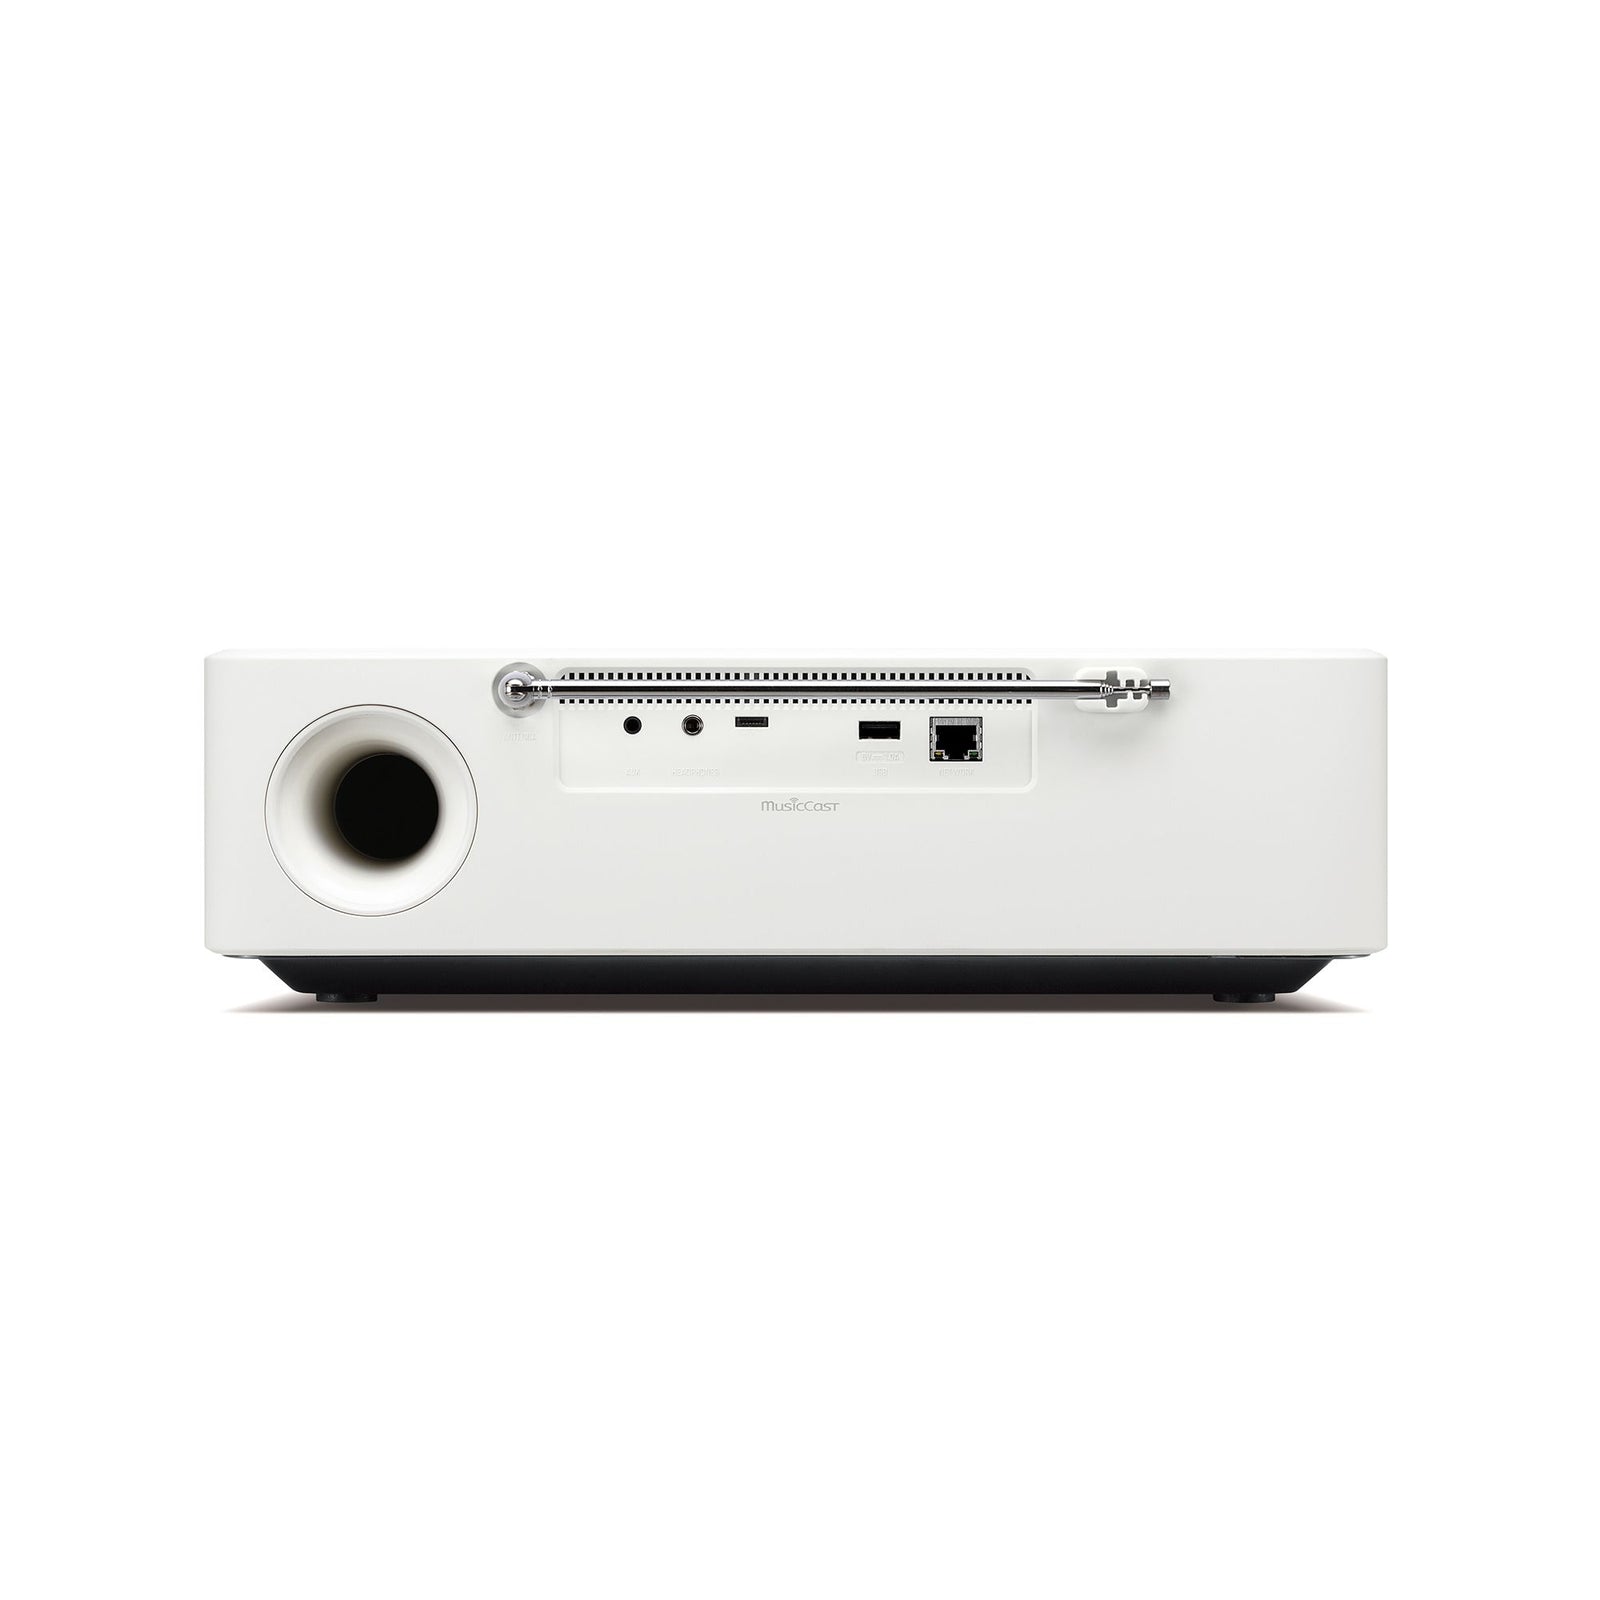 YAMAHA TSX-N237 MUSICCAST 200 | VINYL SOUND All-in-one audio system that fills your heart with music - everything from streaming services to CDs. 8 cm (3-1/4 ") woofer driver × 2 + 2.5 cm (1") tweeter × 2 CD, AUX, USB, Bluetooth®, WiFi, AirPlay 2 Streaming services (Spotify, Amazon Music, deezer, TIDAL, napster, pandora, SiriusXM, qobuz, radiko, QQMusic)